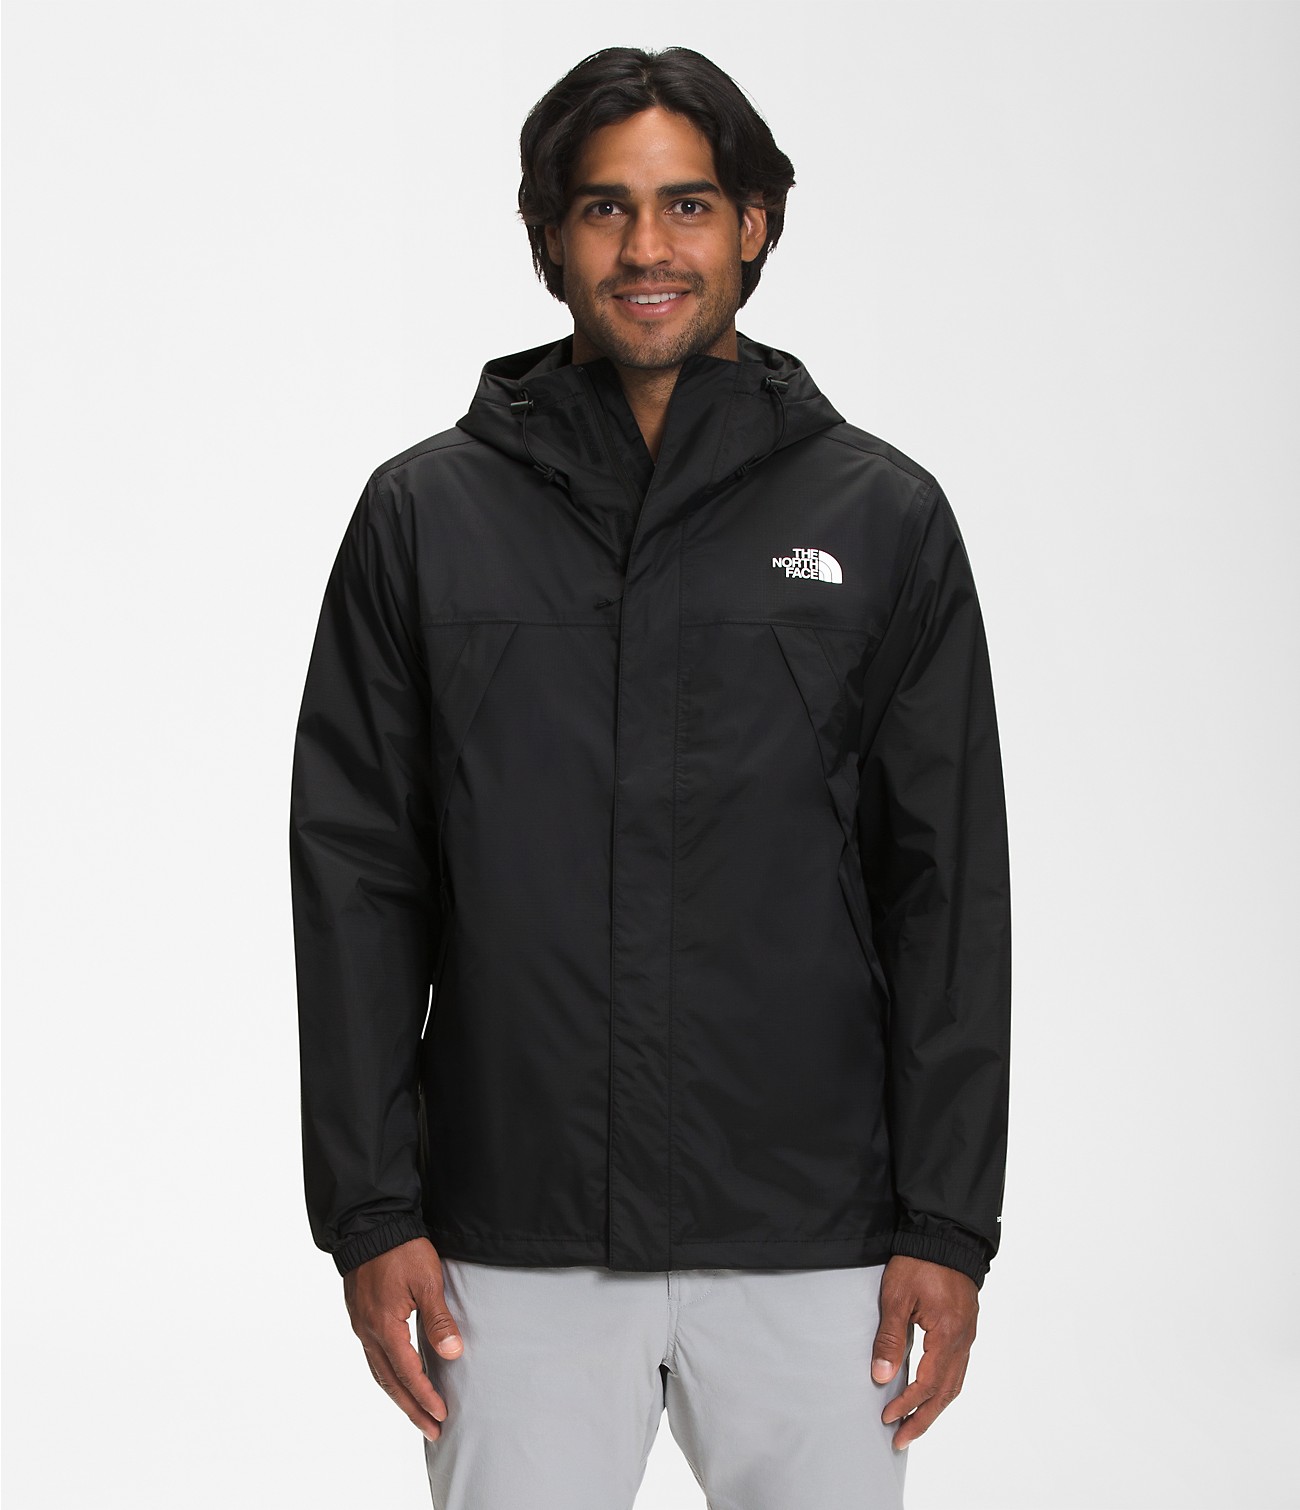 Unlock Wilderness' choice in the Lululemon Vs North Face comparison, the Antora Jacket by The North Face